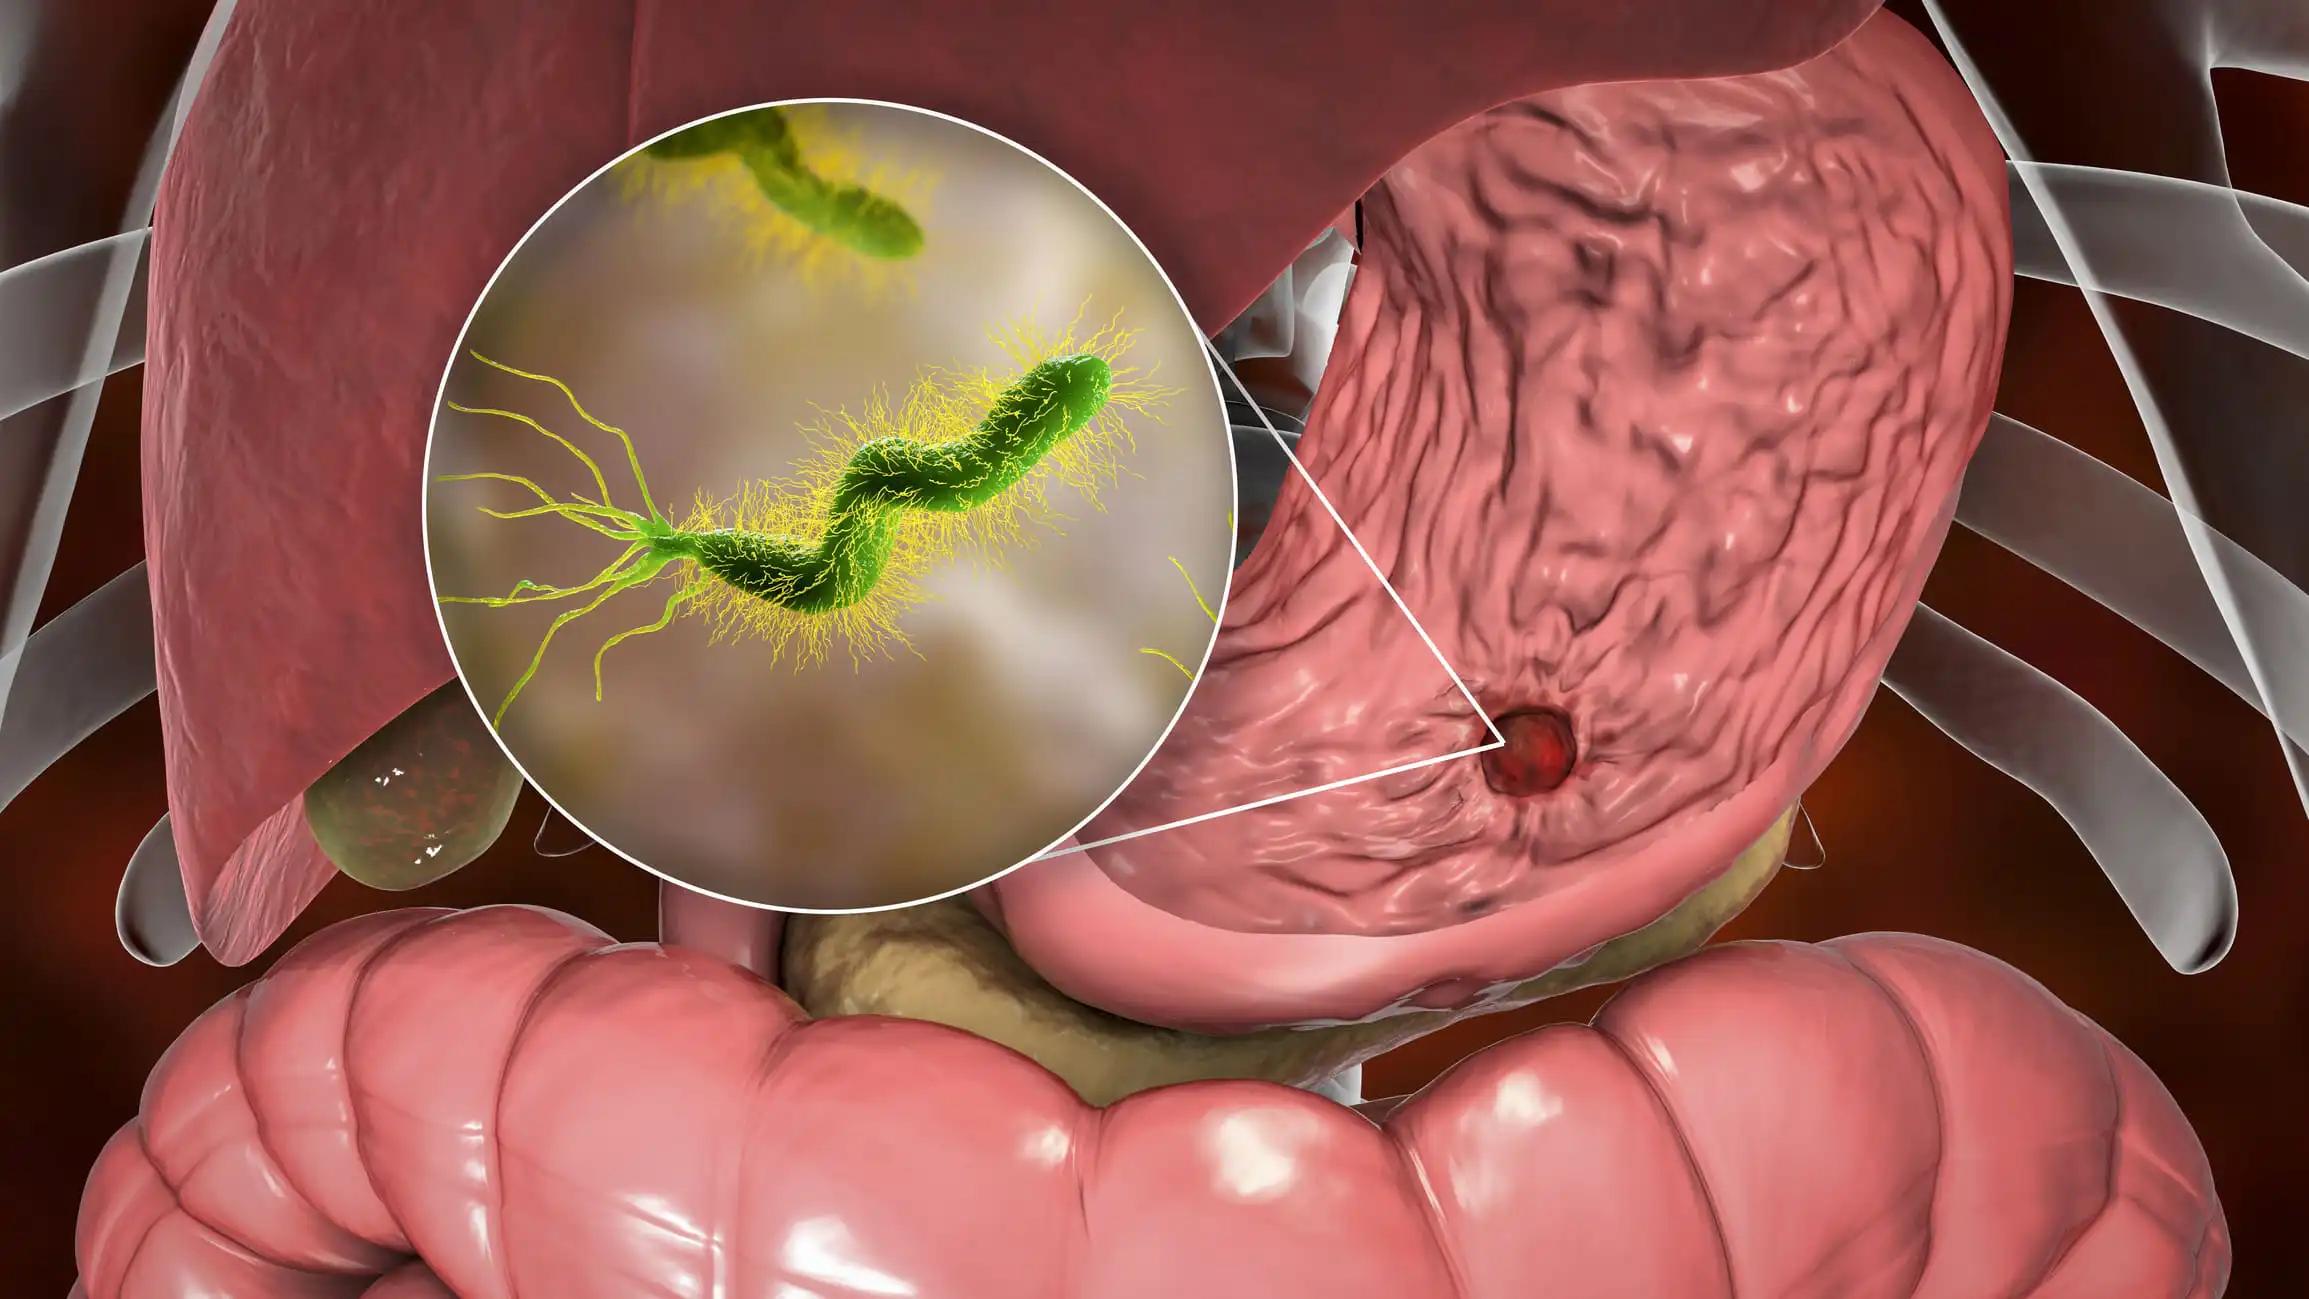 Gastric Ulcer and Helicobacter Pylori Bacteria in Stomach